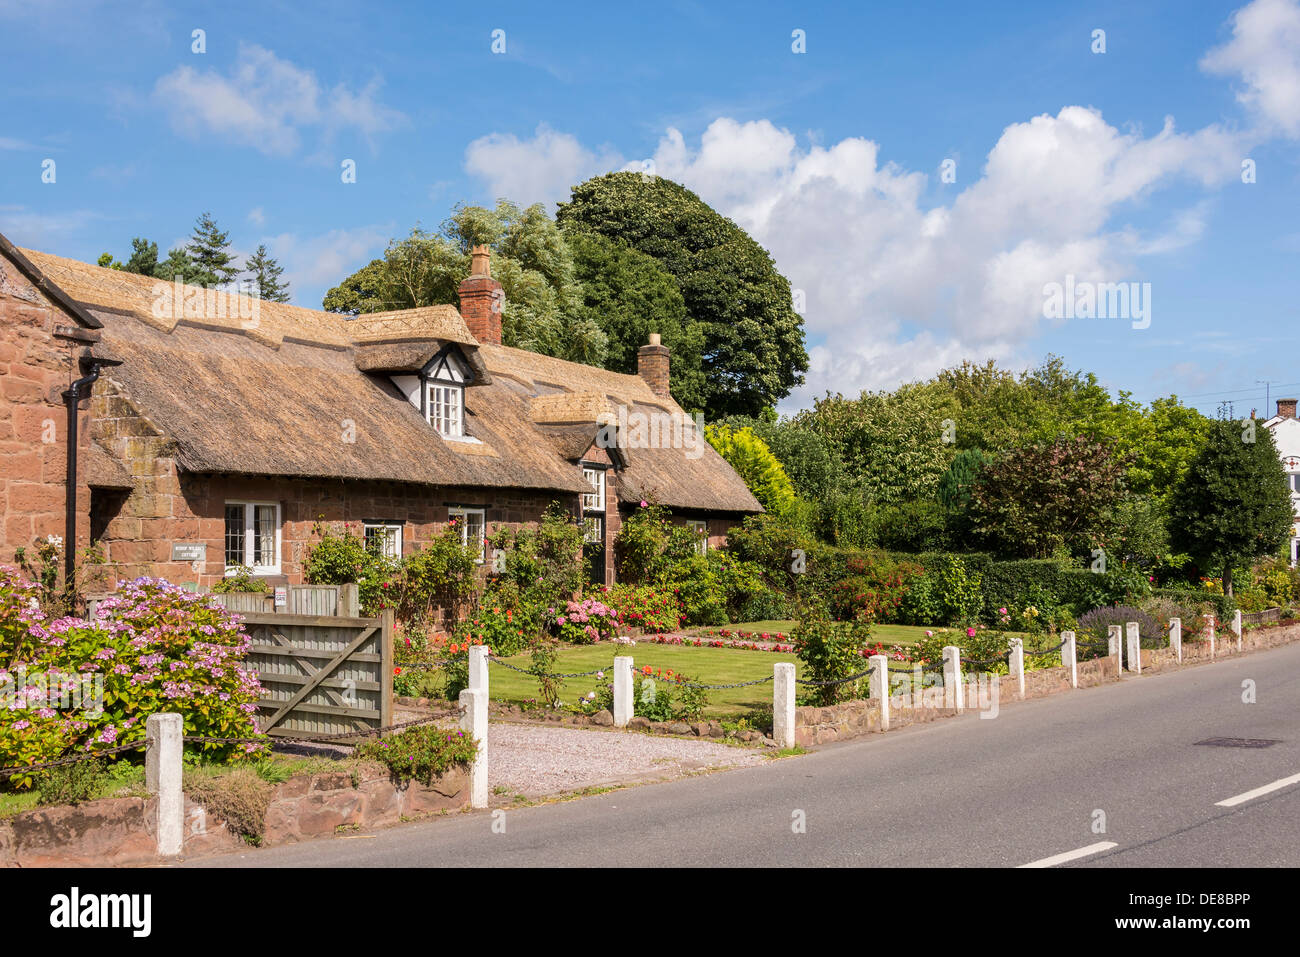 Burton a village on the Wirral Peninsula. Thatched cottage. House name is Bishop Wilson's Cottage. Stock Photo